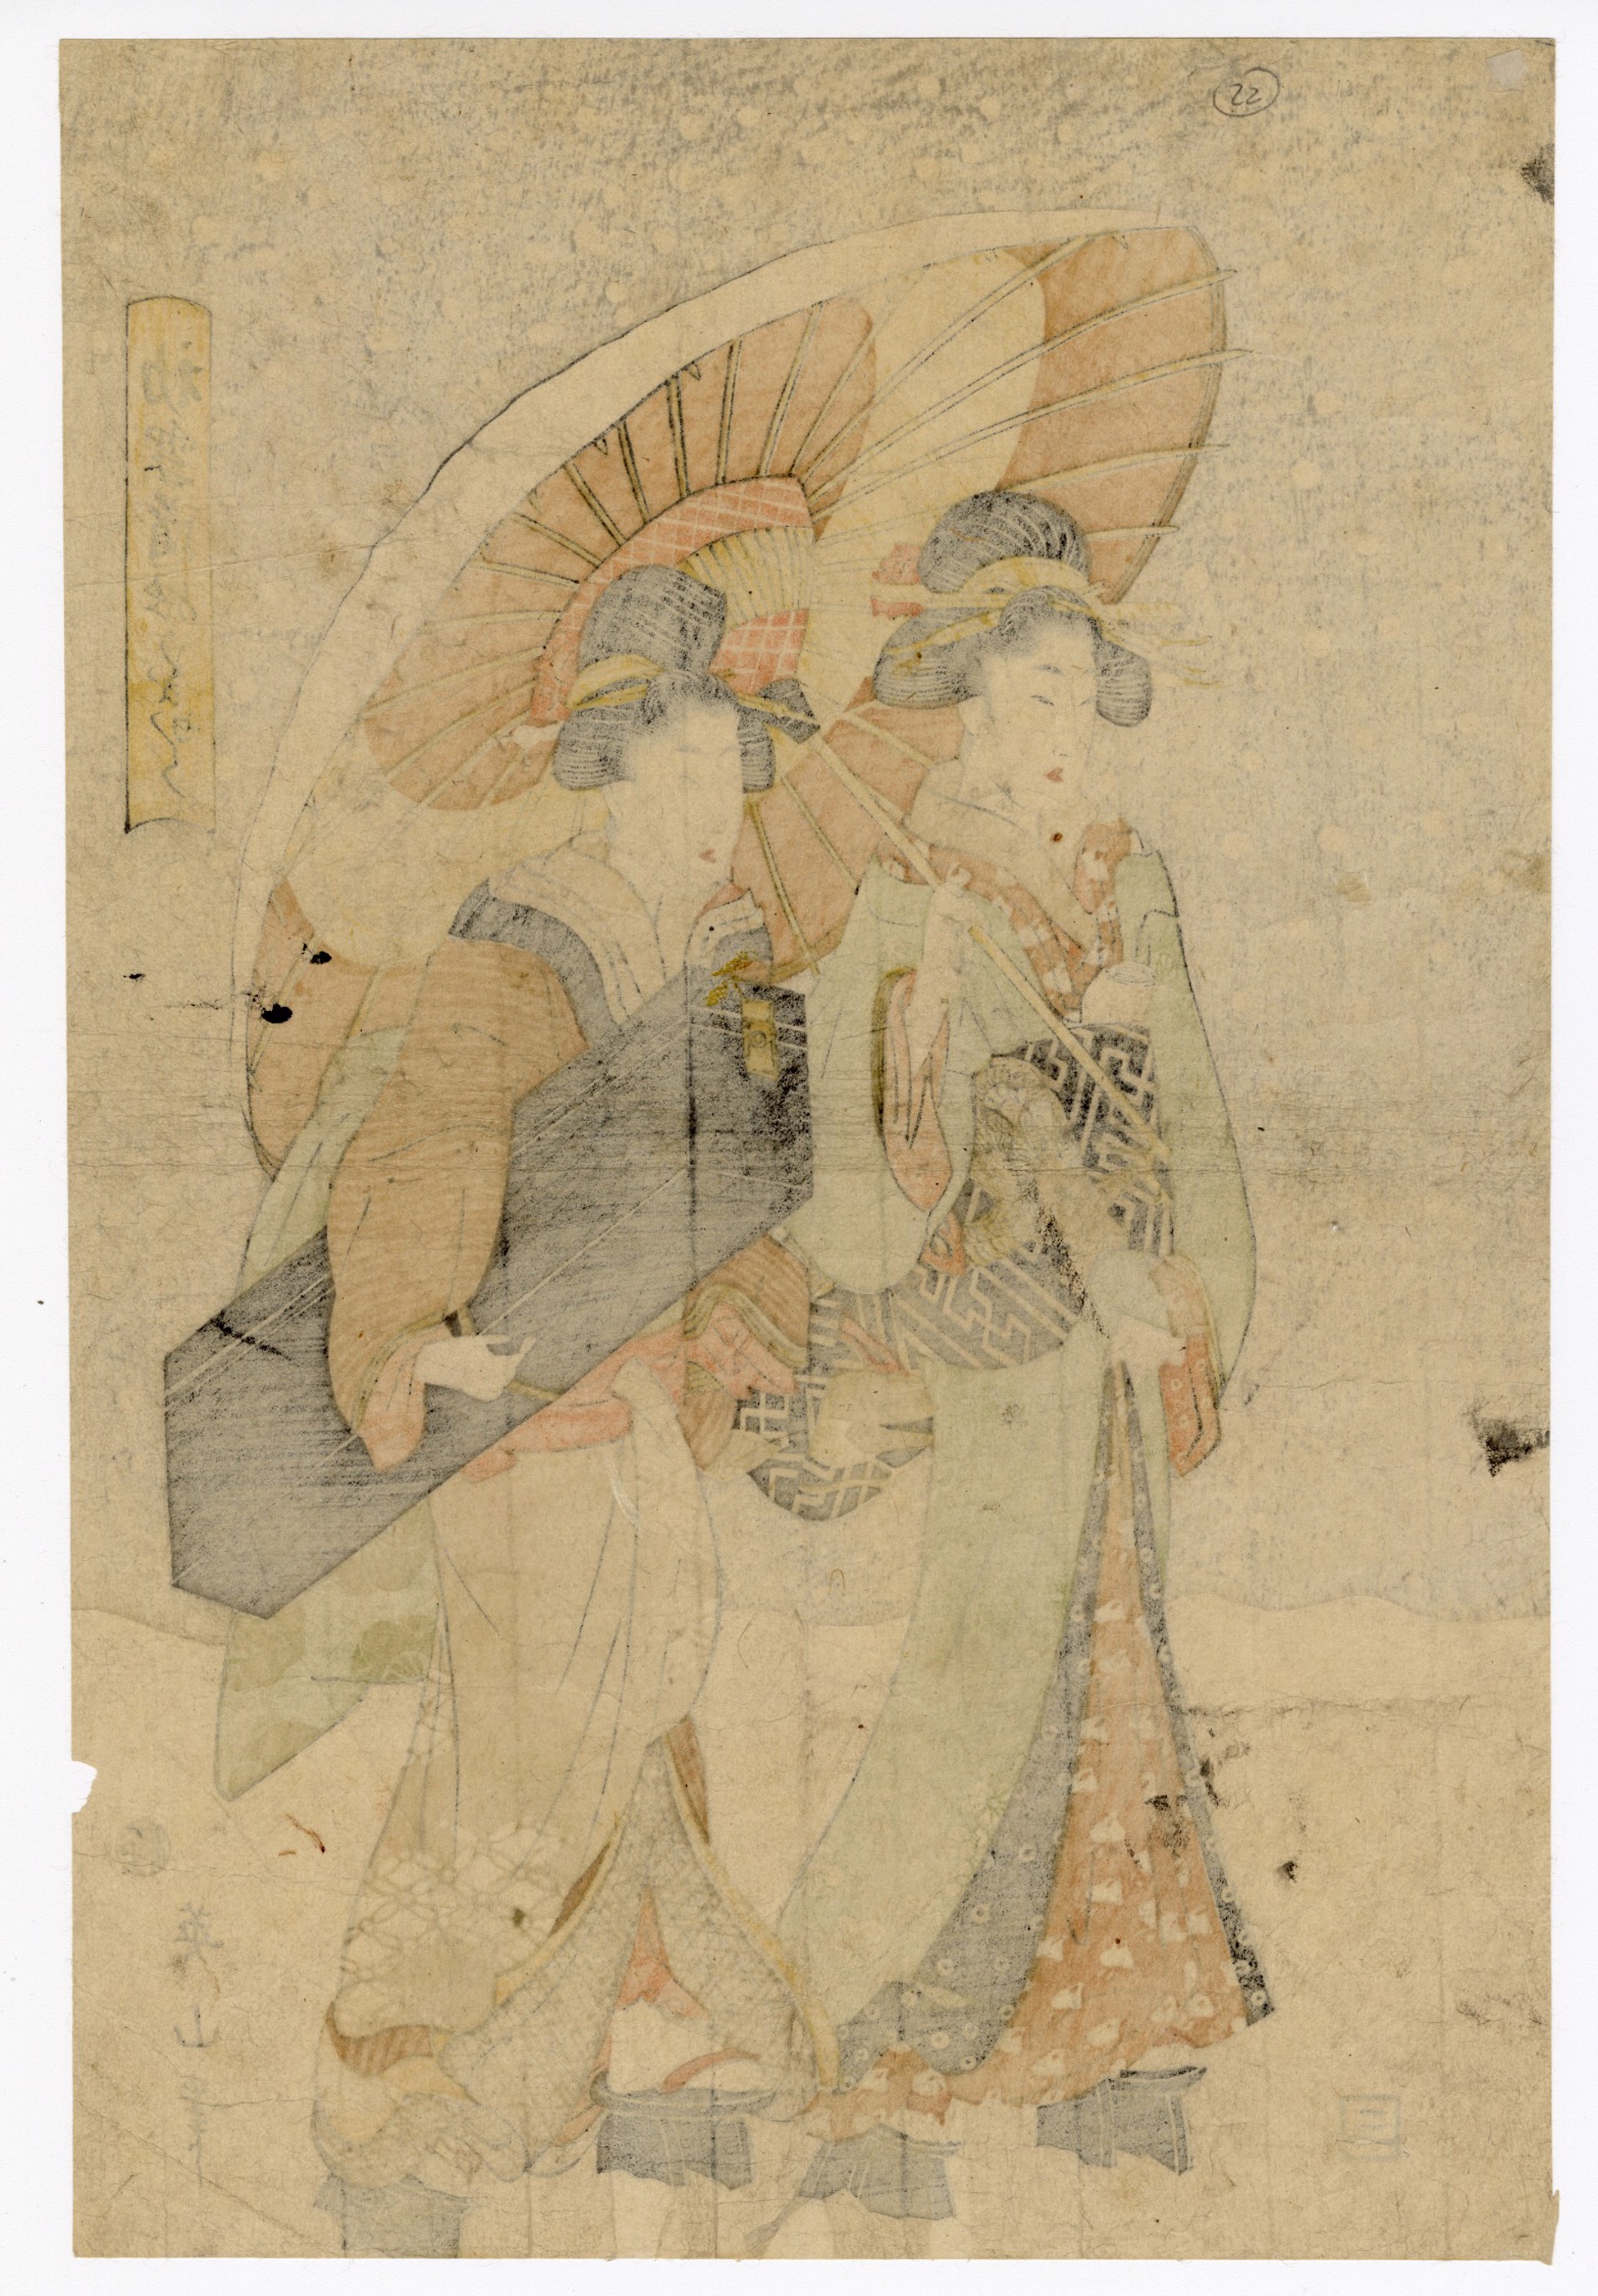 Two Geisha Walking to an Engagement in the the Snow. by Eizan